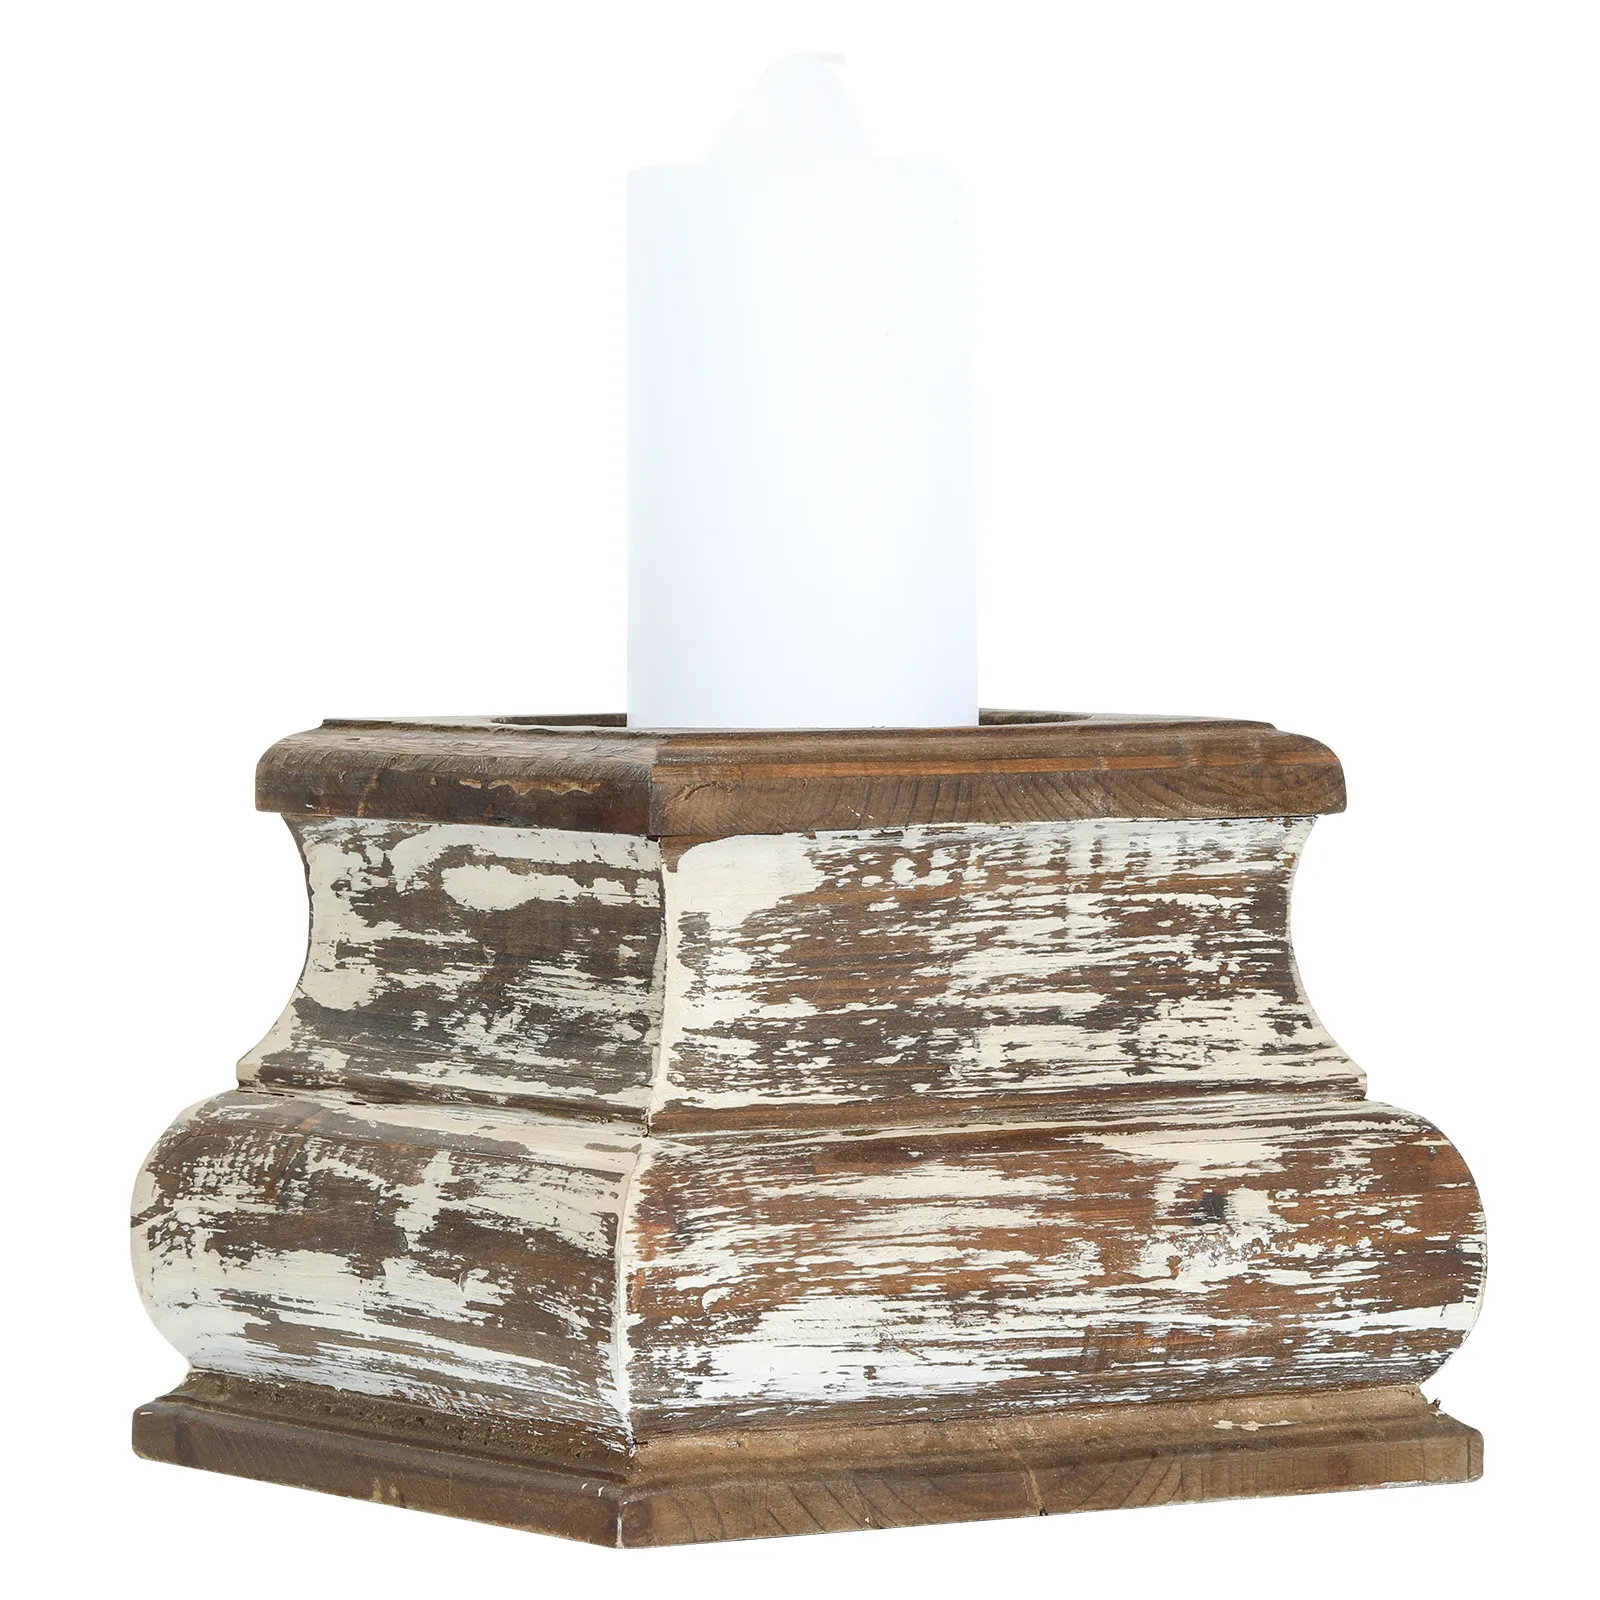 Cheap Wholesale Farmhouse Table Centrepiece Large Wood Rustic Candle Holder Candle Sticker Home Decor